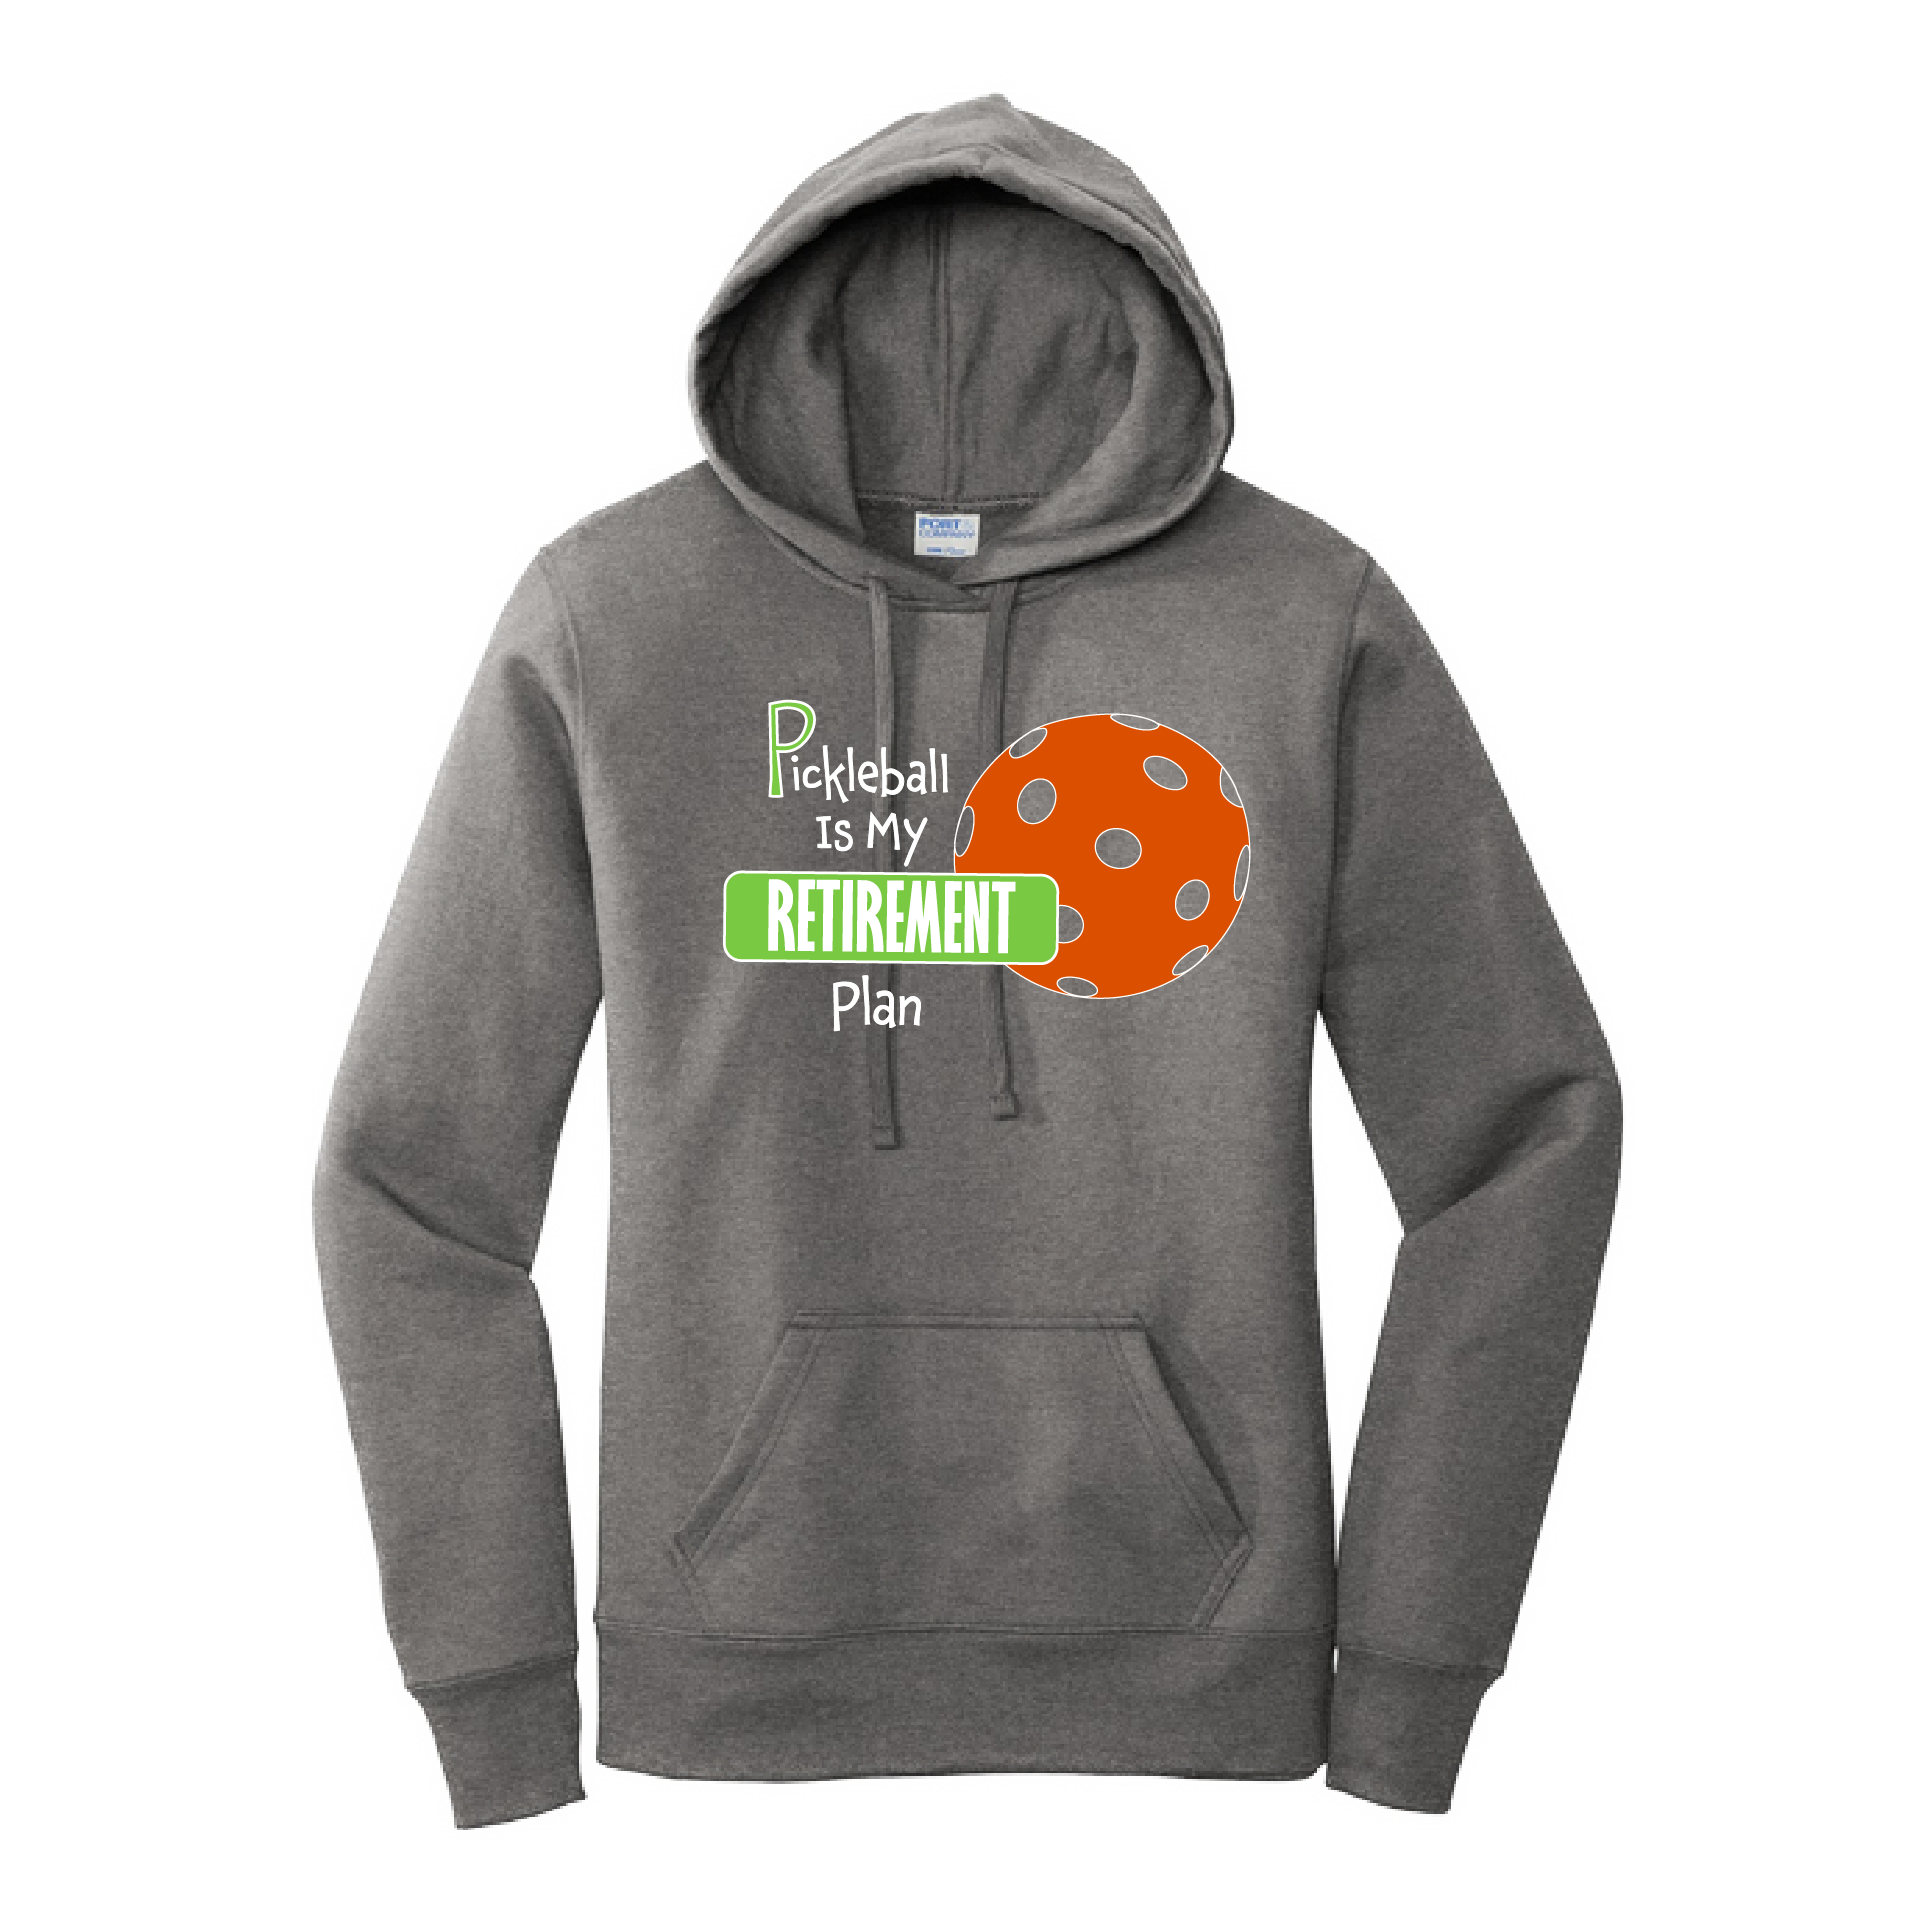 Pickleball Design: Pickleball is my Retirement plan  Women's Hooded pullover Sweatshirt  Turn up the volume in this Women's Sweatshirts with its perfect mix of softness and attitude. Ultra soft lined inside with a lined hood also. This is fitted nicely for a women's figure. Front pouch pocket.